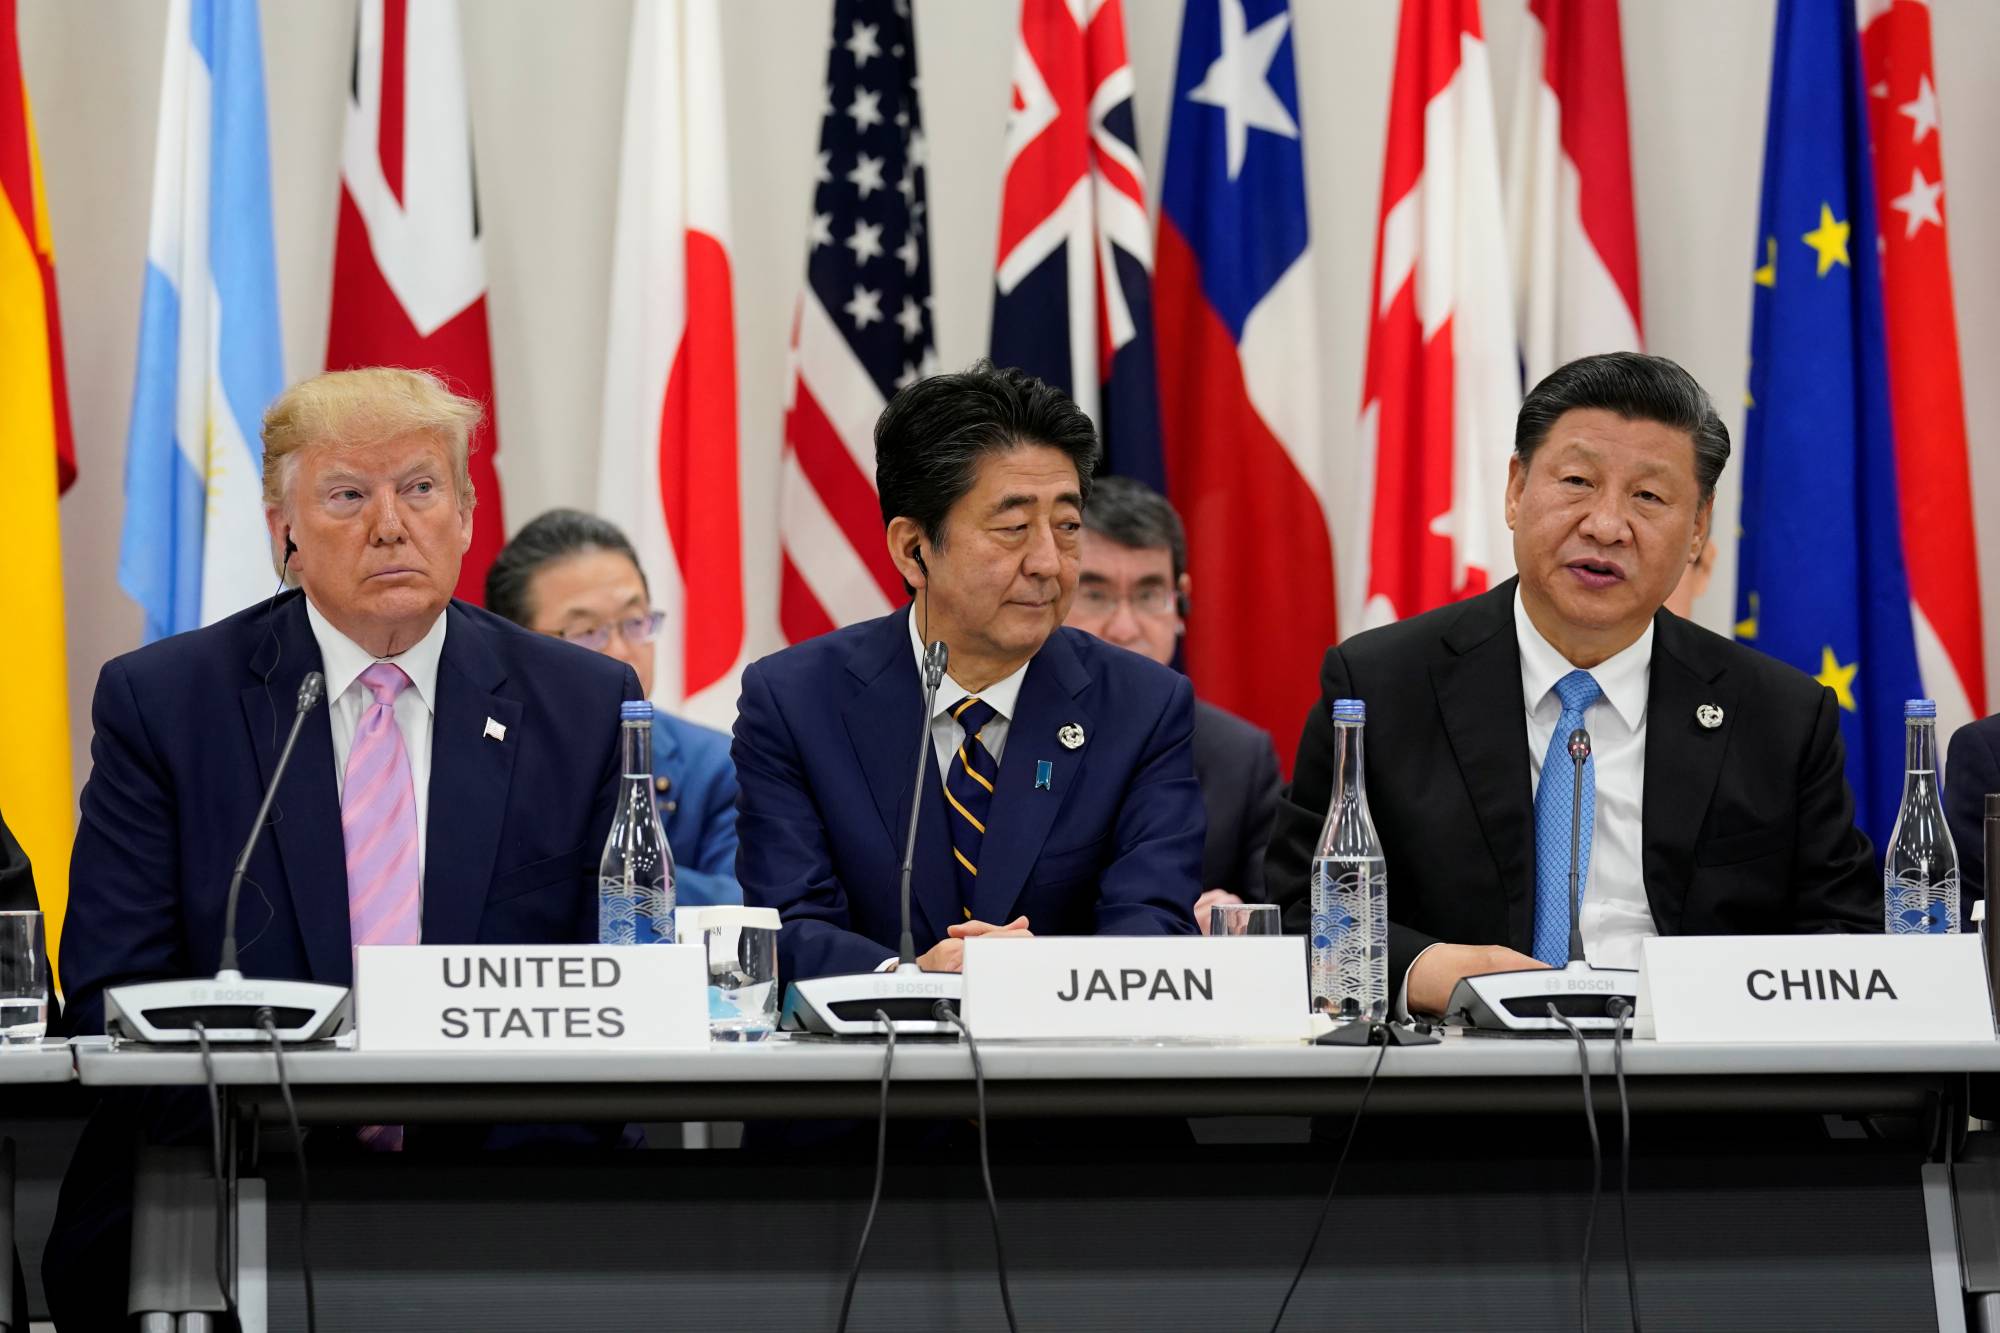 Prime Minister Shinzo Abe is flanked by U.S. President Donald Trump and Chinese leader Xi Jinping during a meeting at the Group of 20 summit in Osaka in June last year. | REUTERS